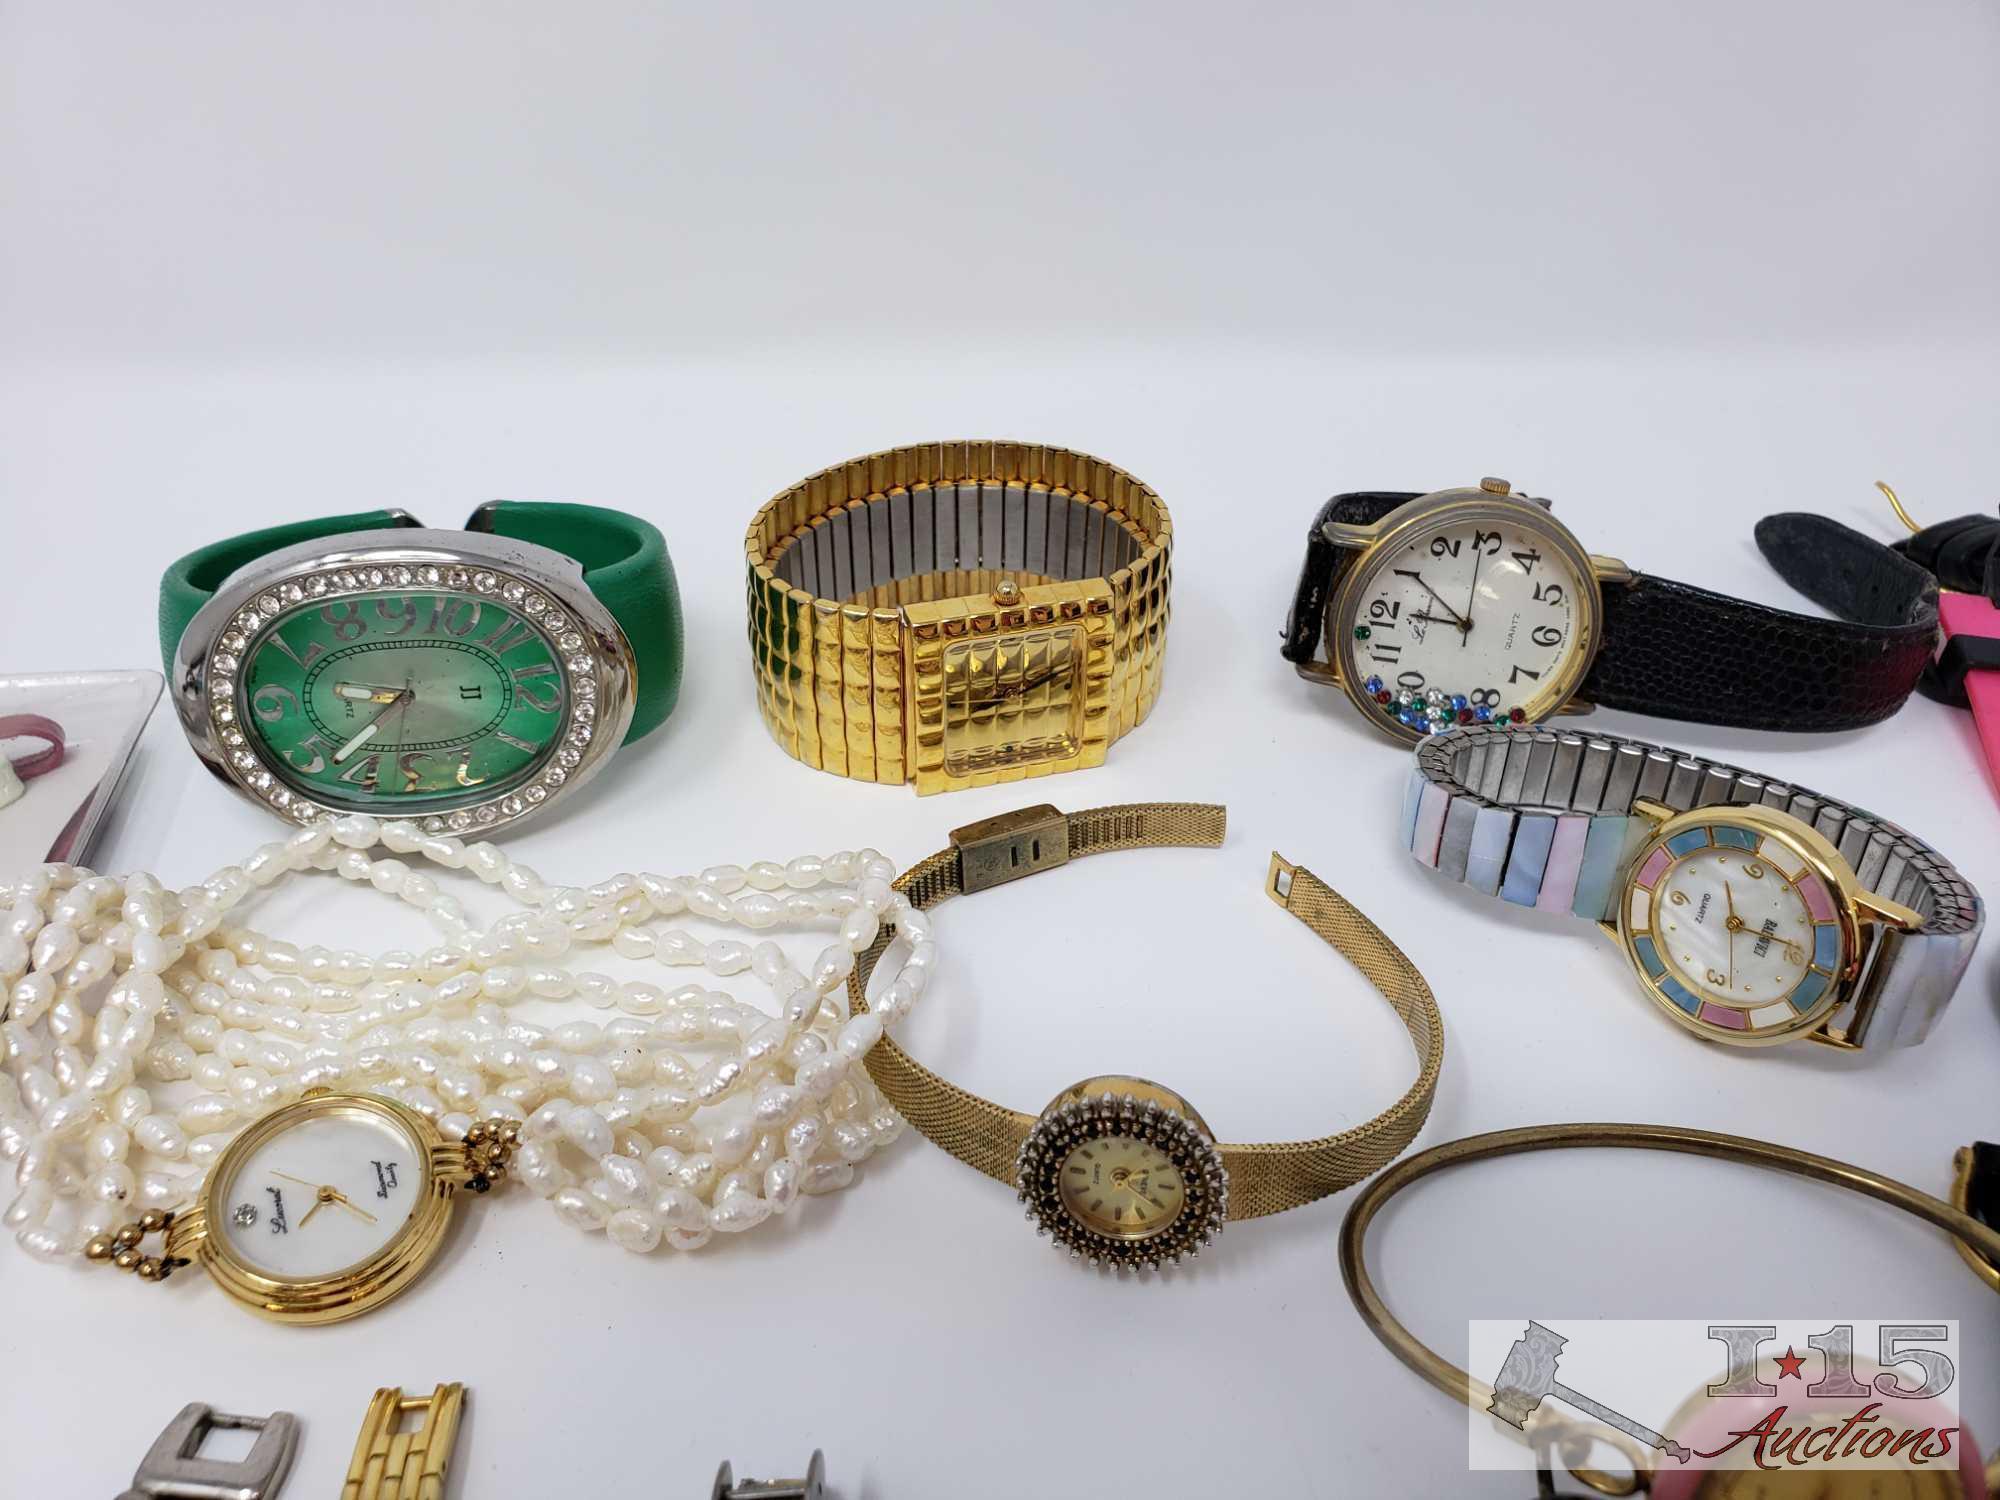 Assorted Watches, Stopwatches and a Necklace